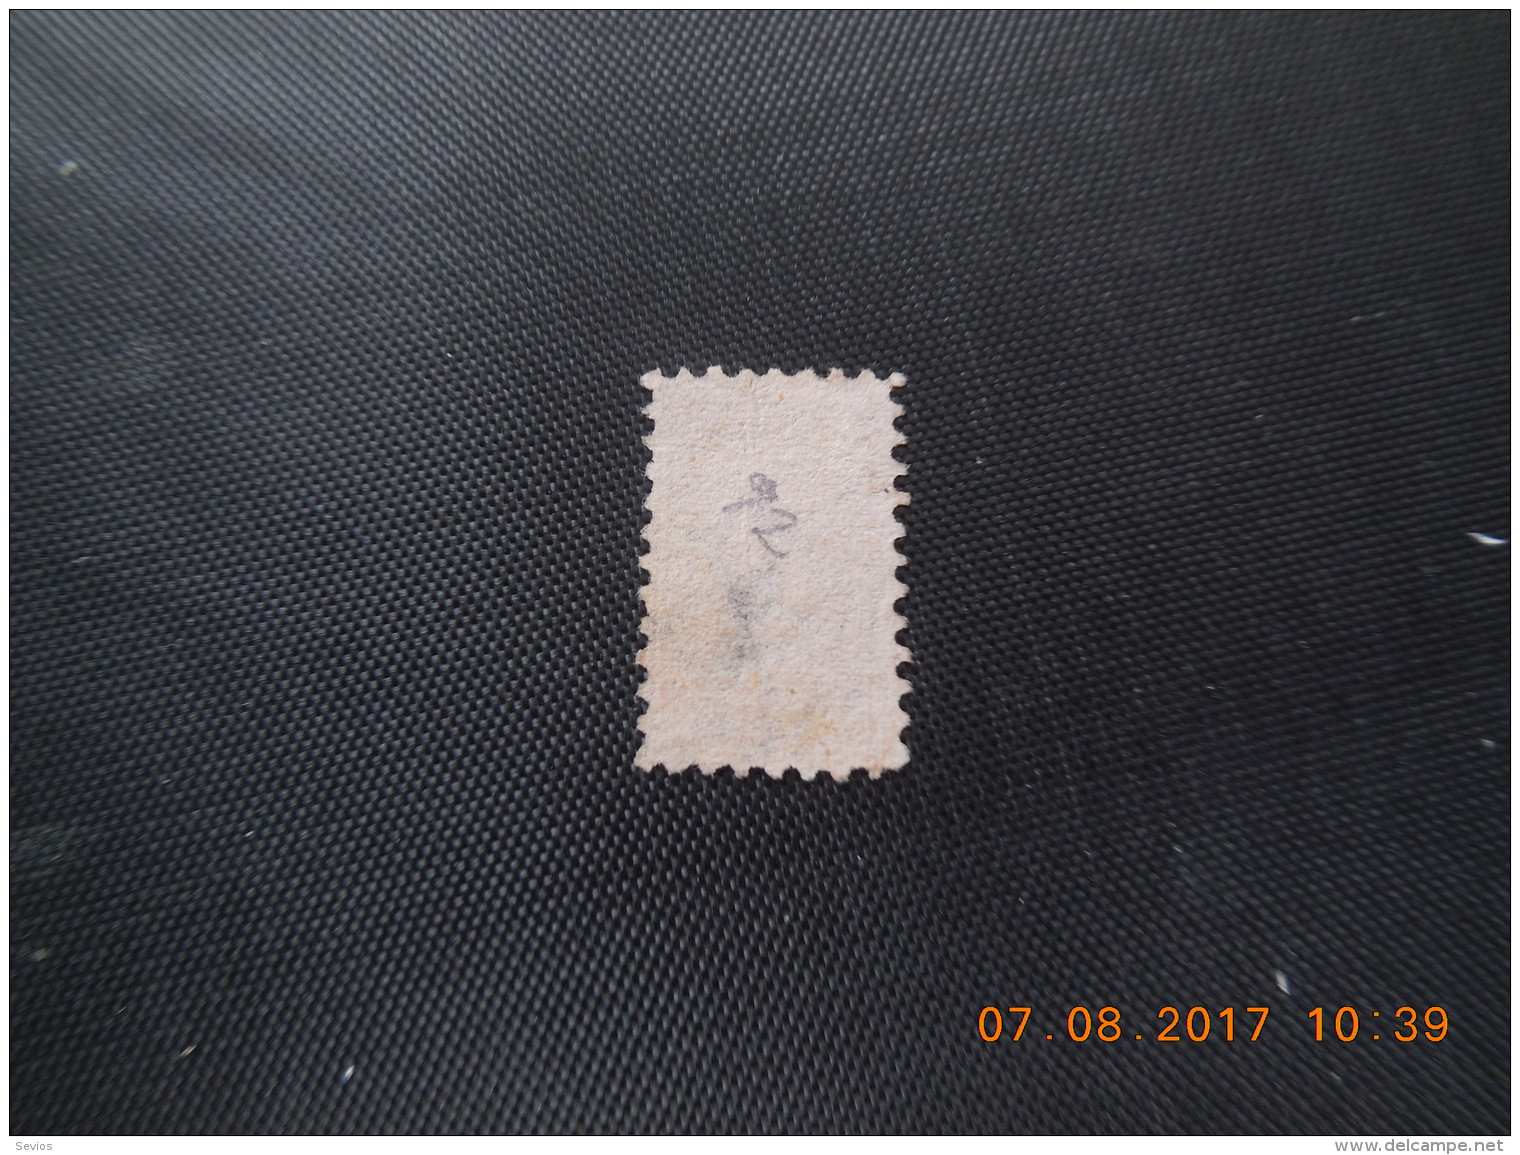 Victoria - Used Stamps